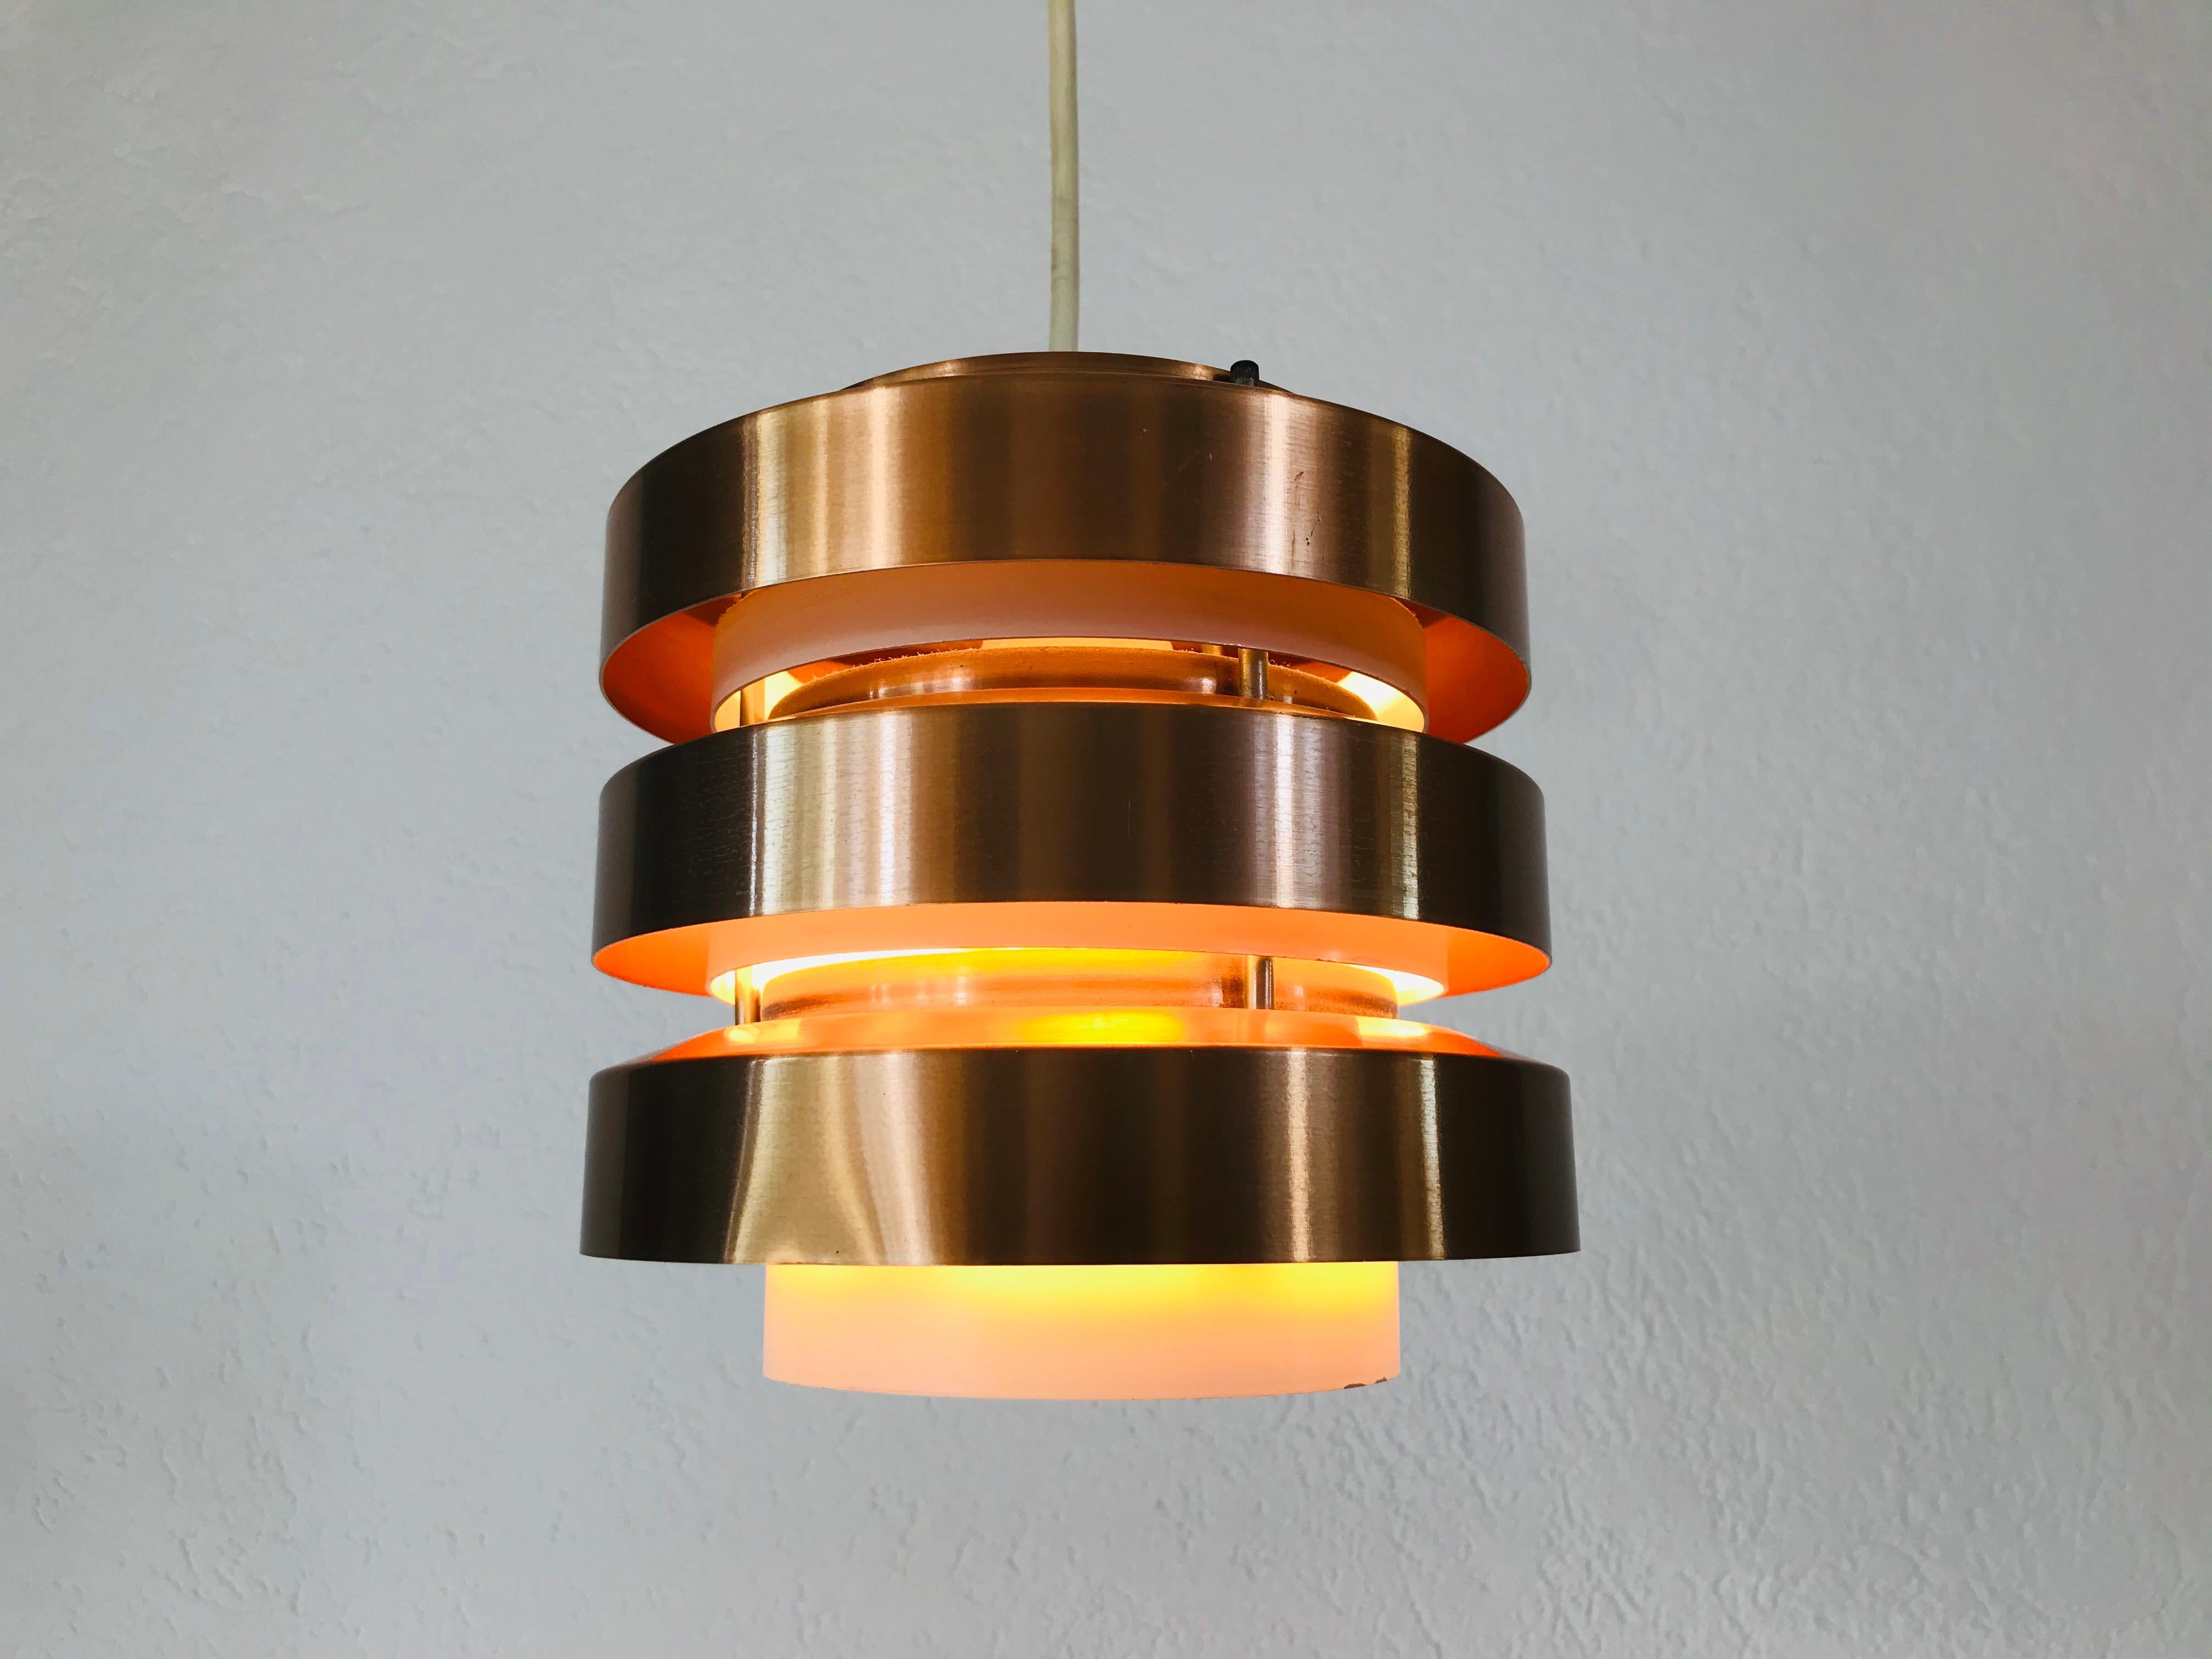 Rare Copper and Metal Pendant Lamp from DDR, 1960s For Sale 3